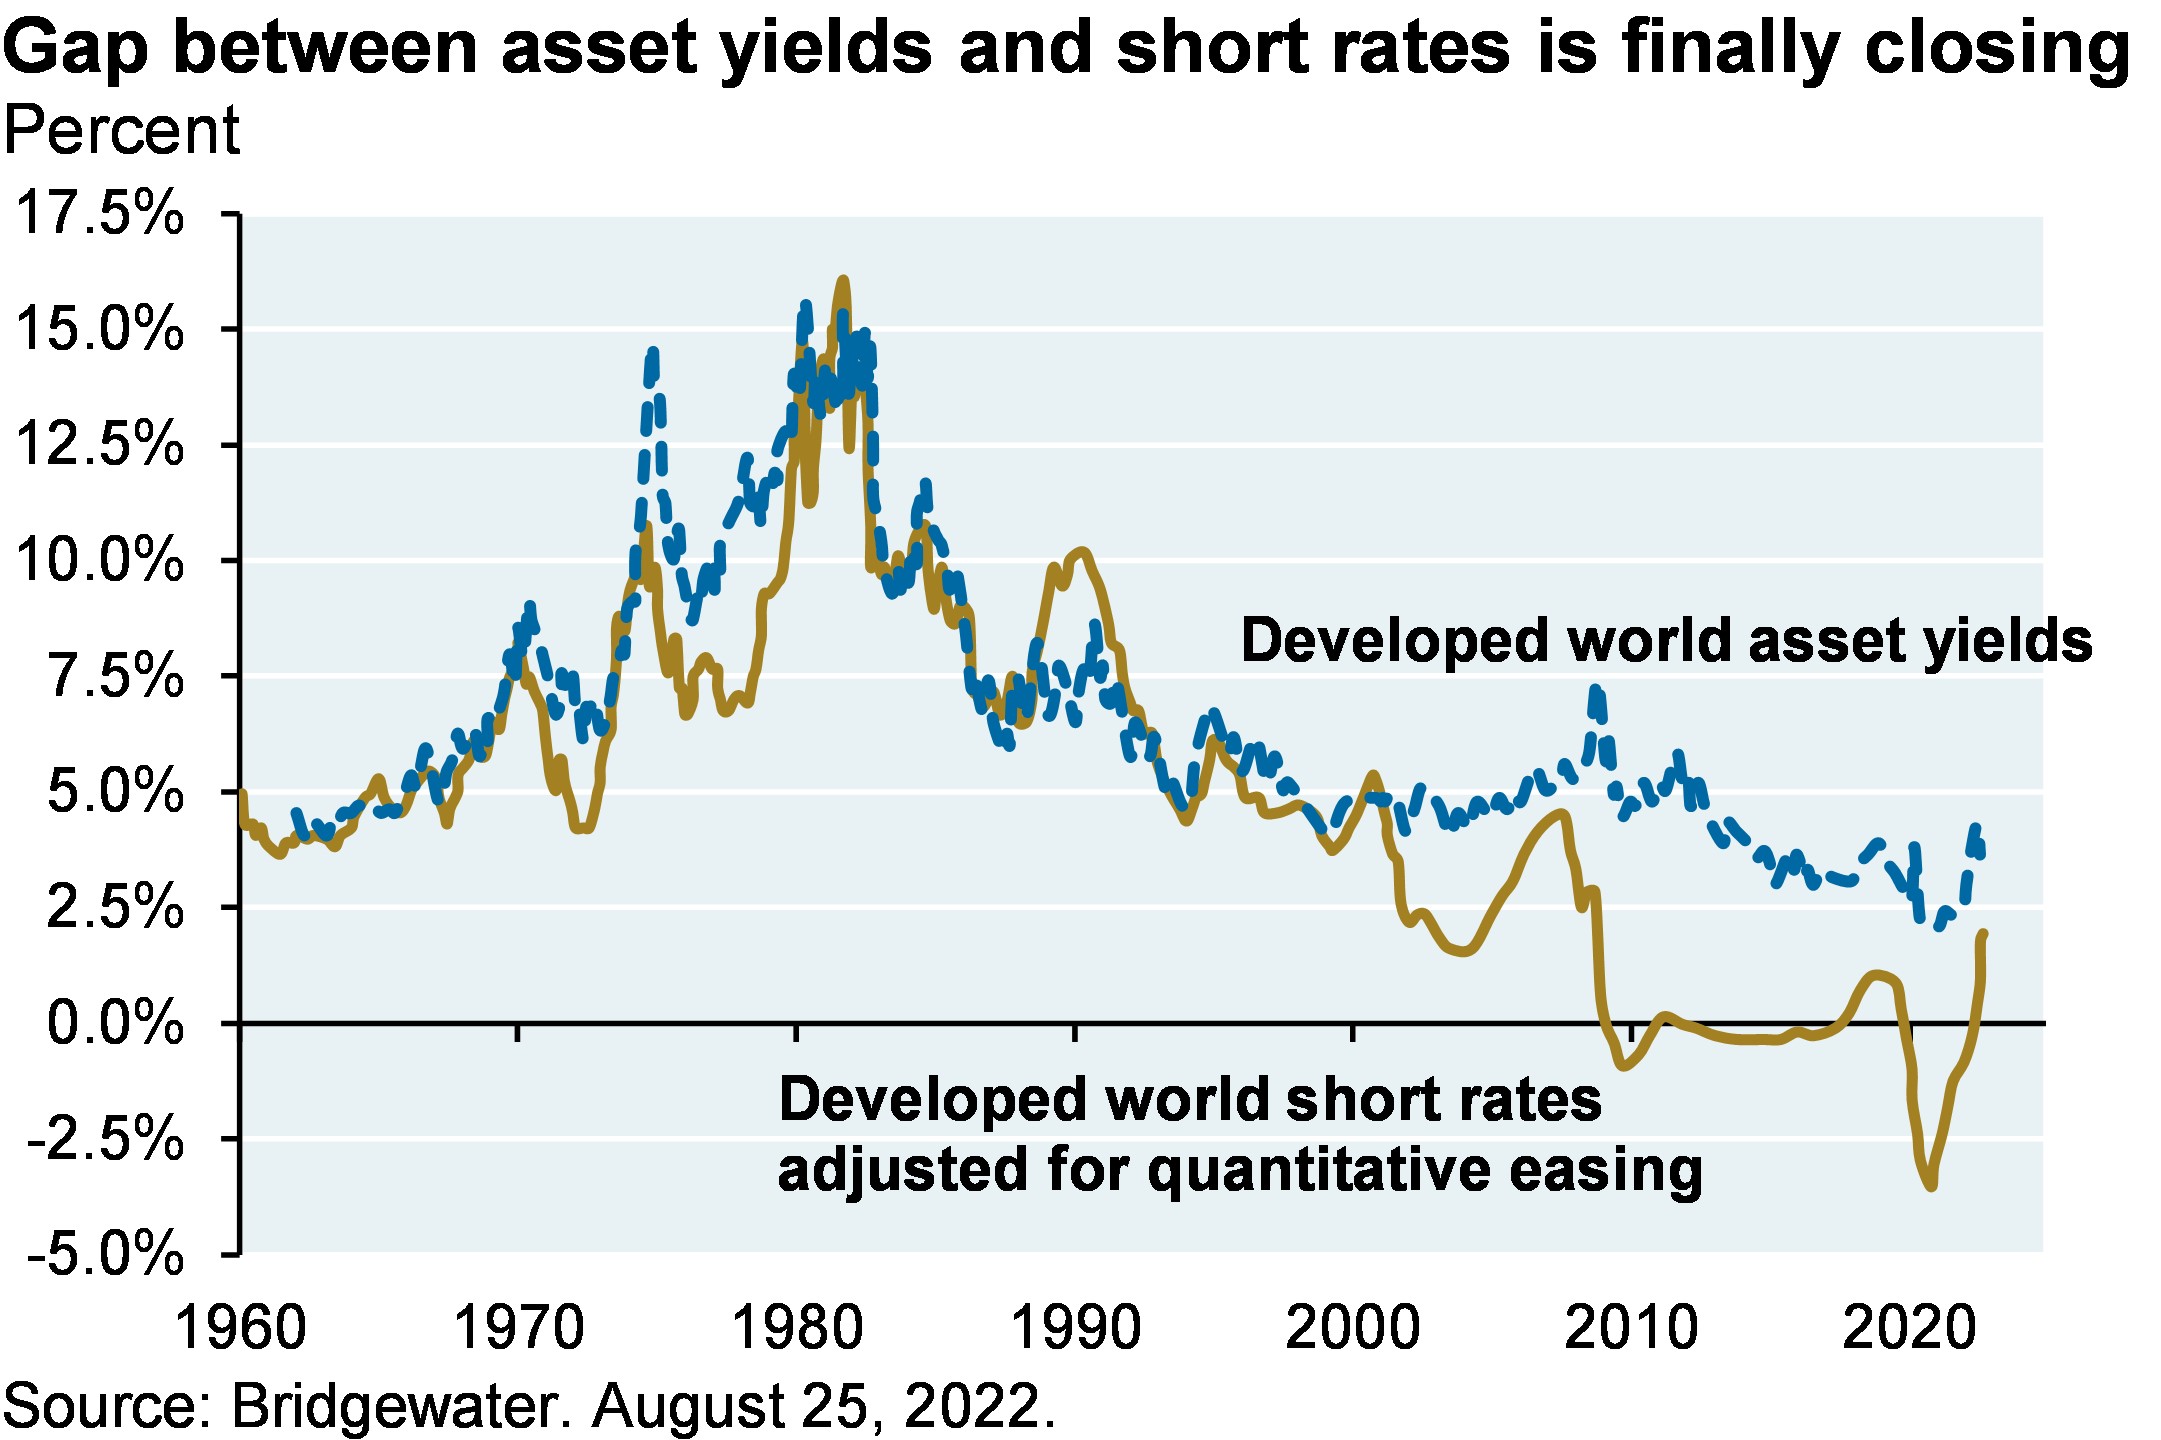 Gap between asset yields and short rates is finally closing